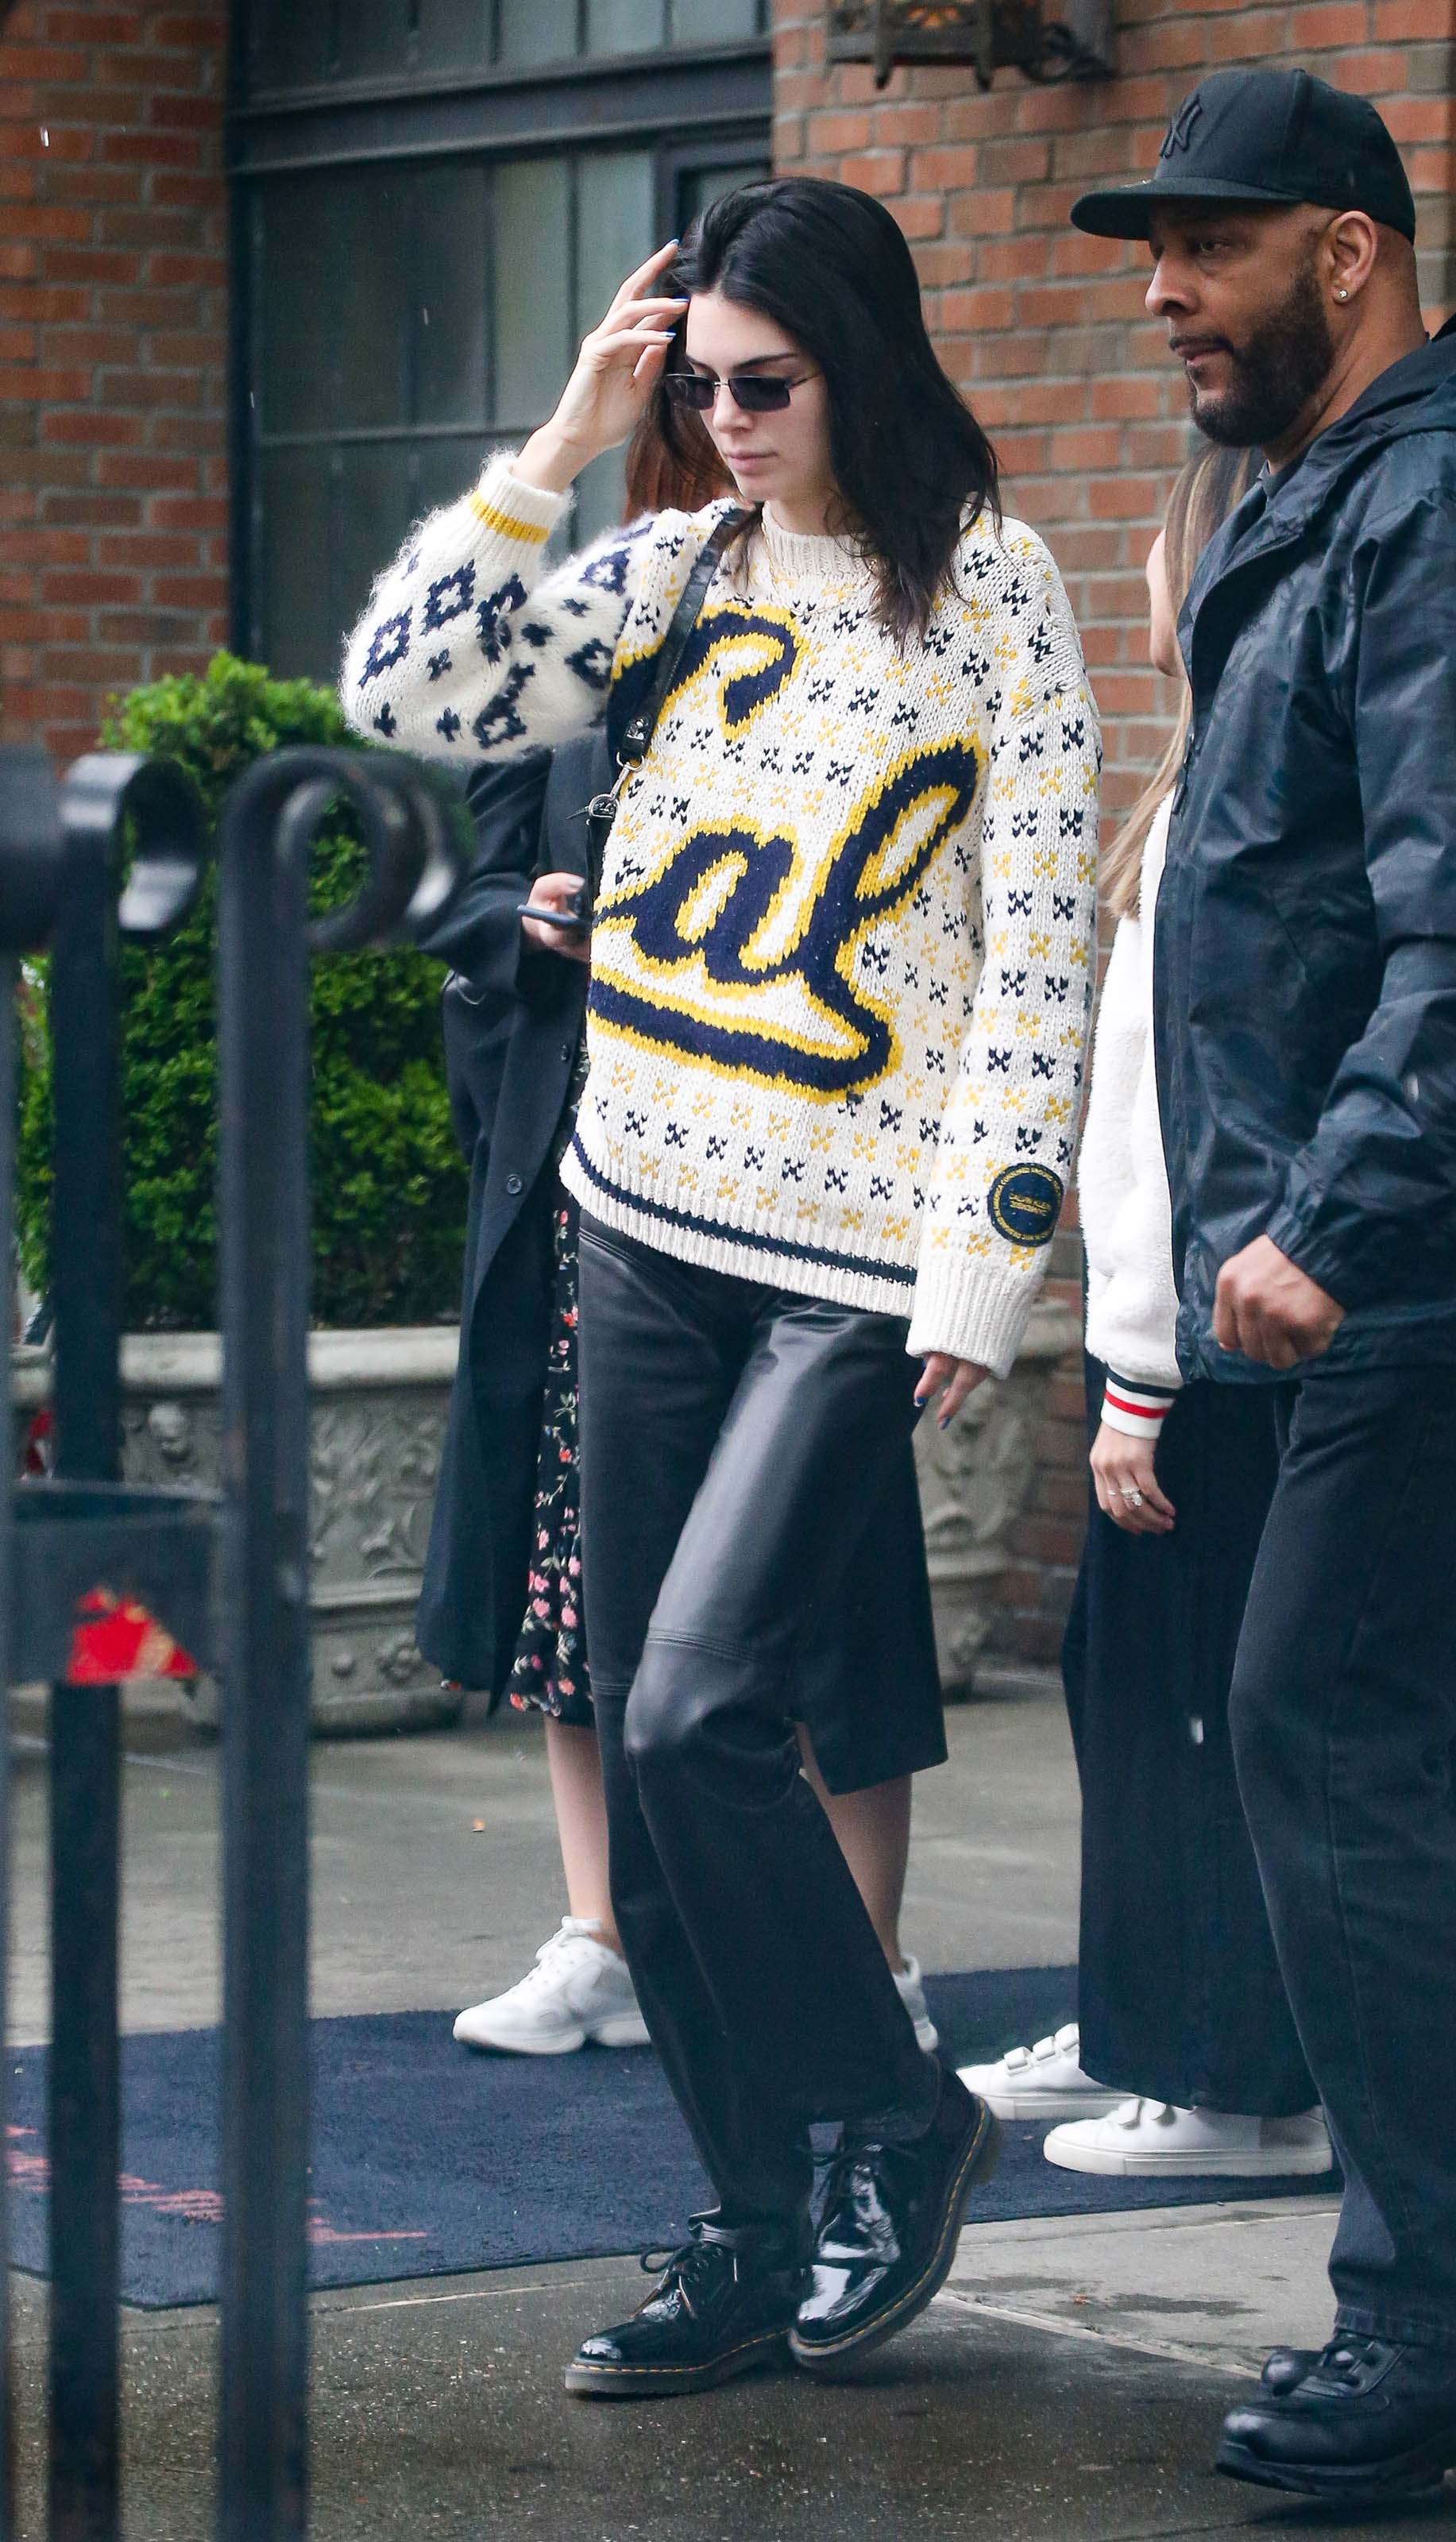 Kendall Jenner steps out in NYC